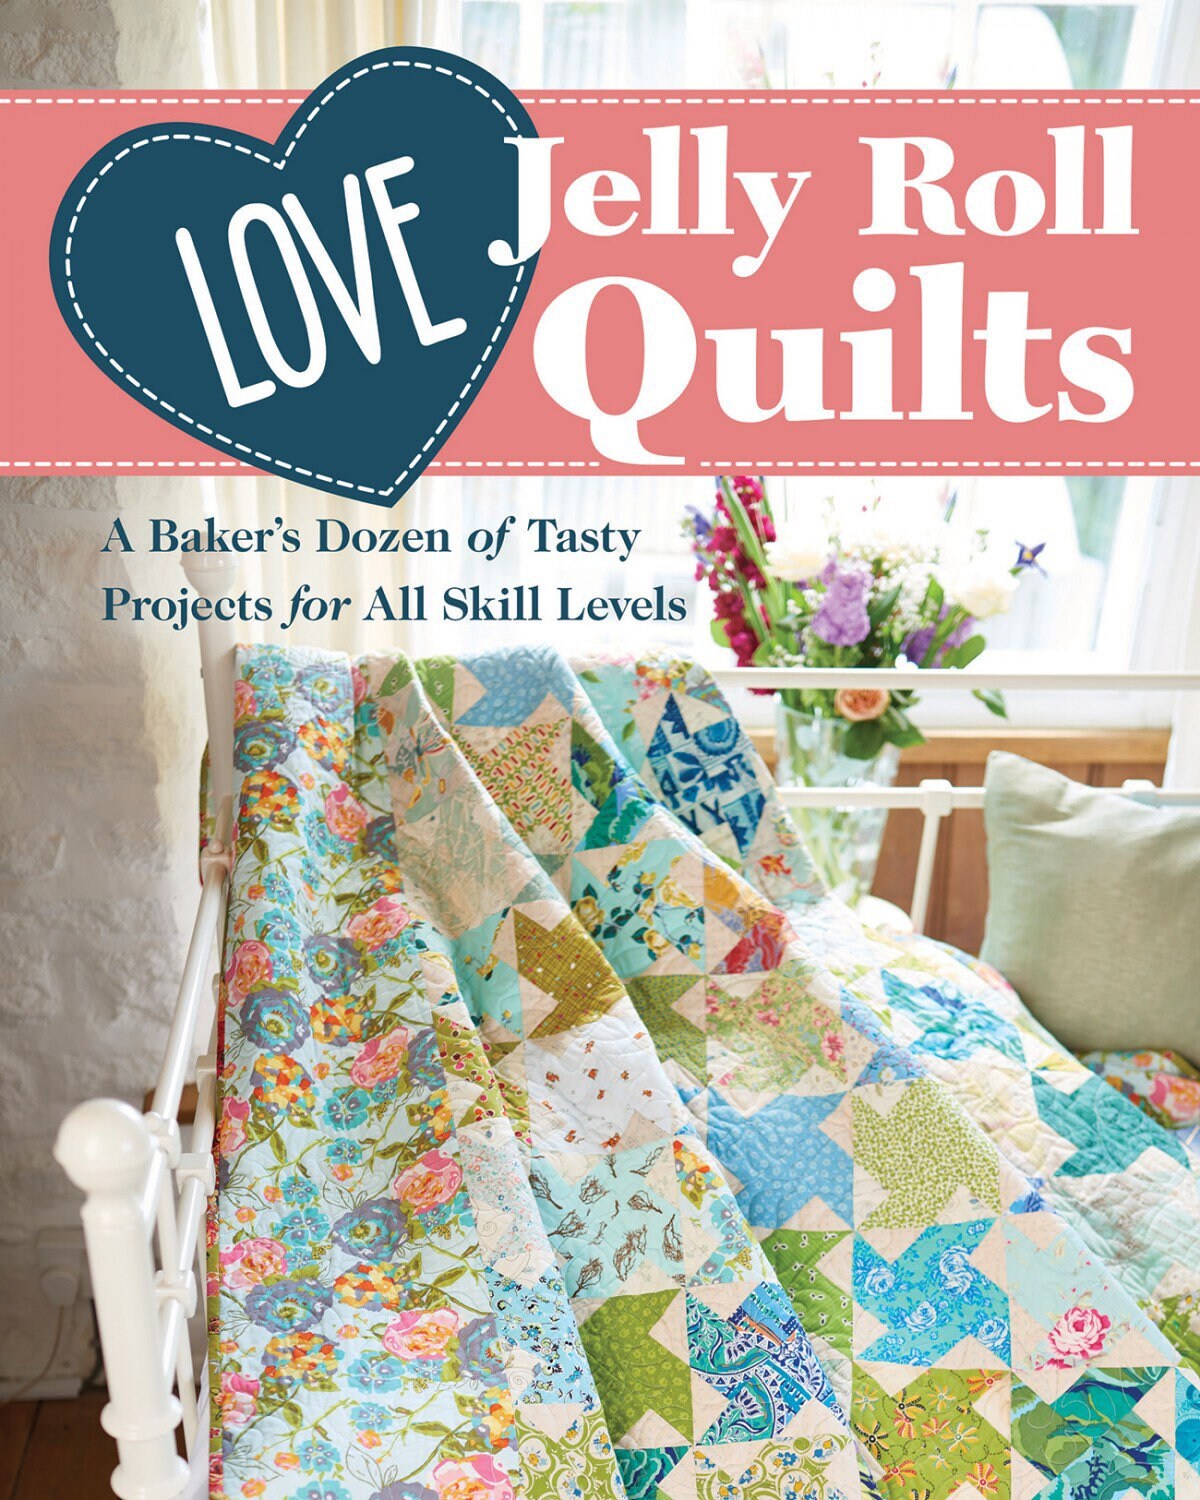 Love Jelly Roll Quilts Book